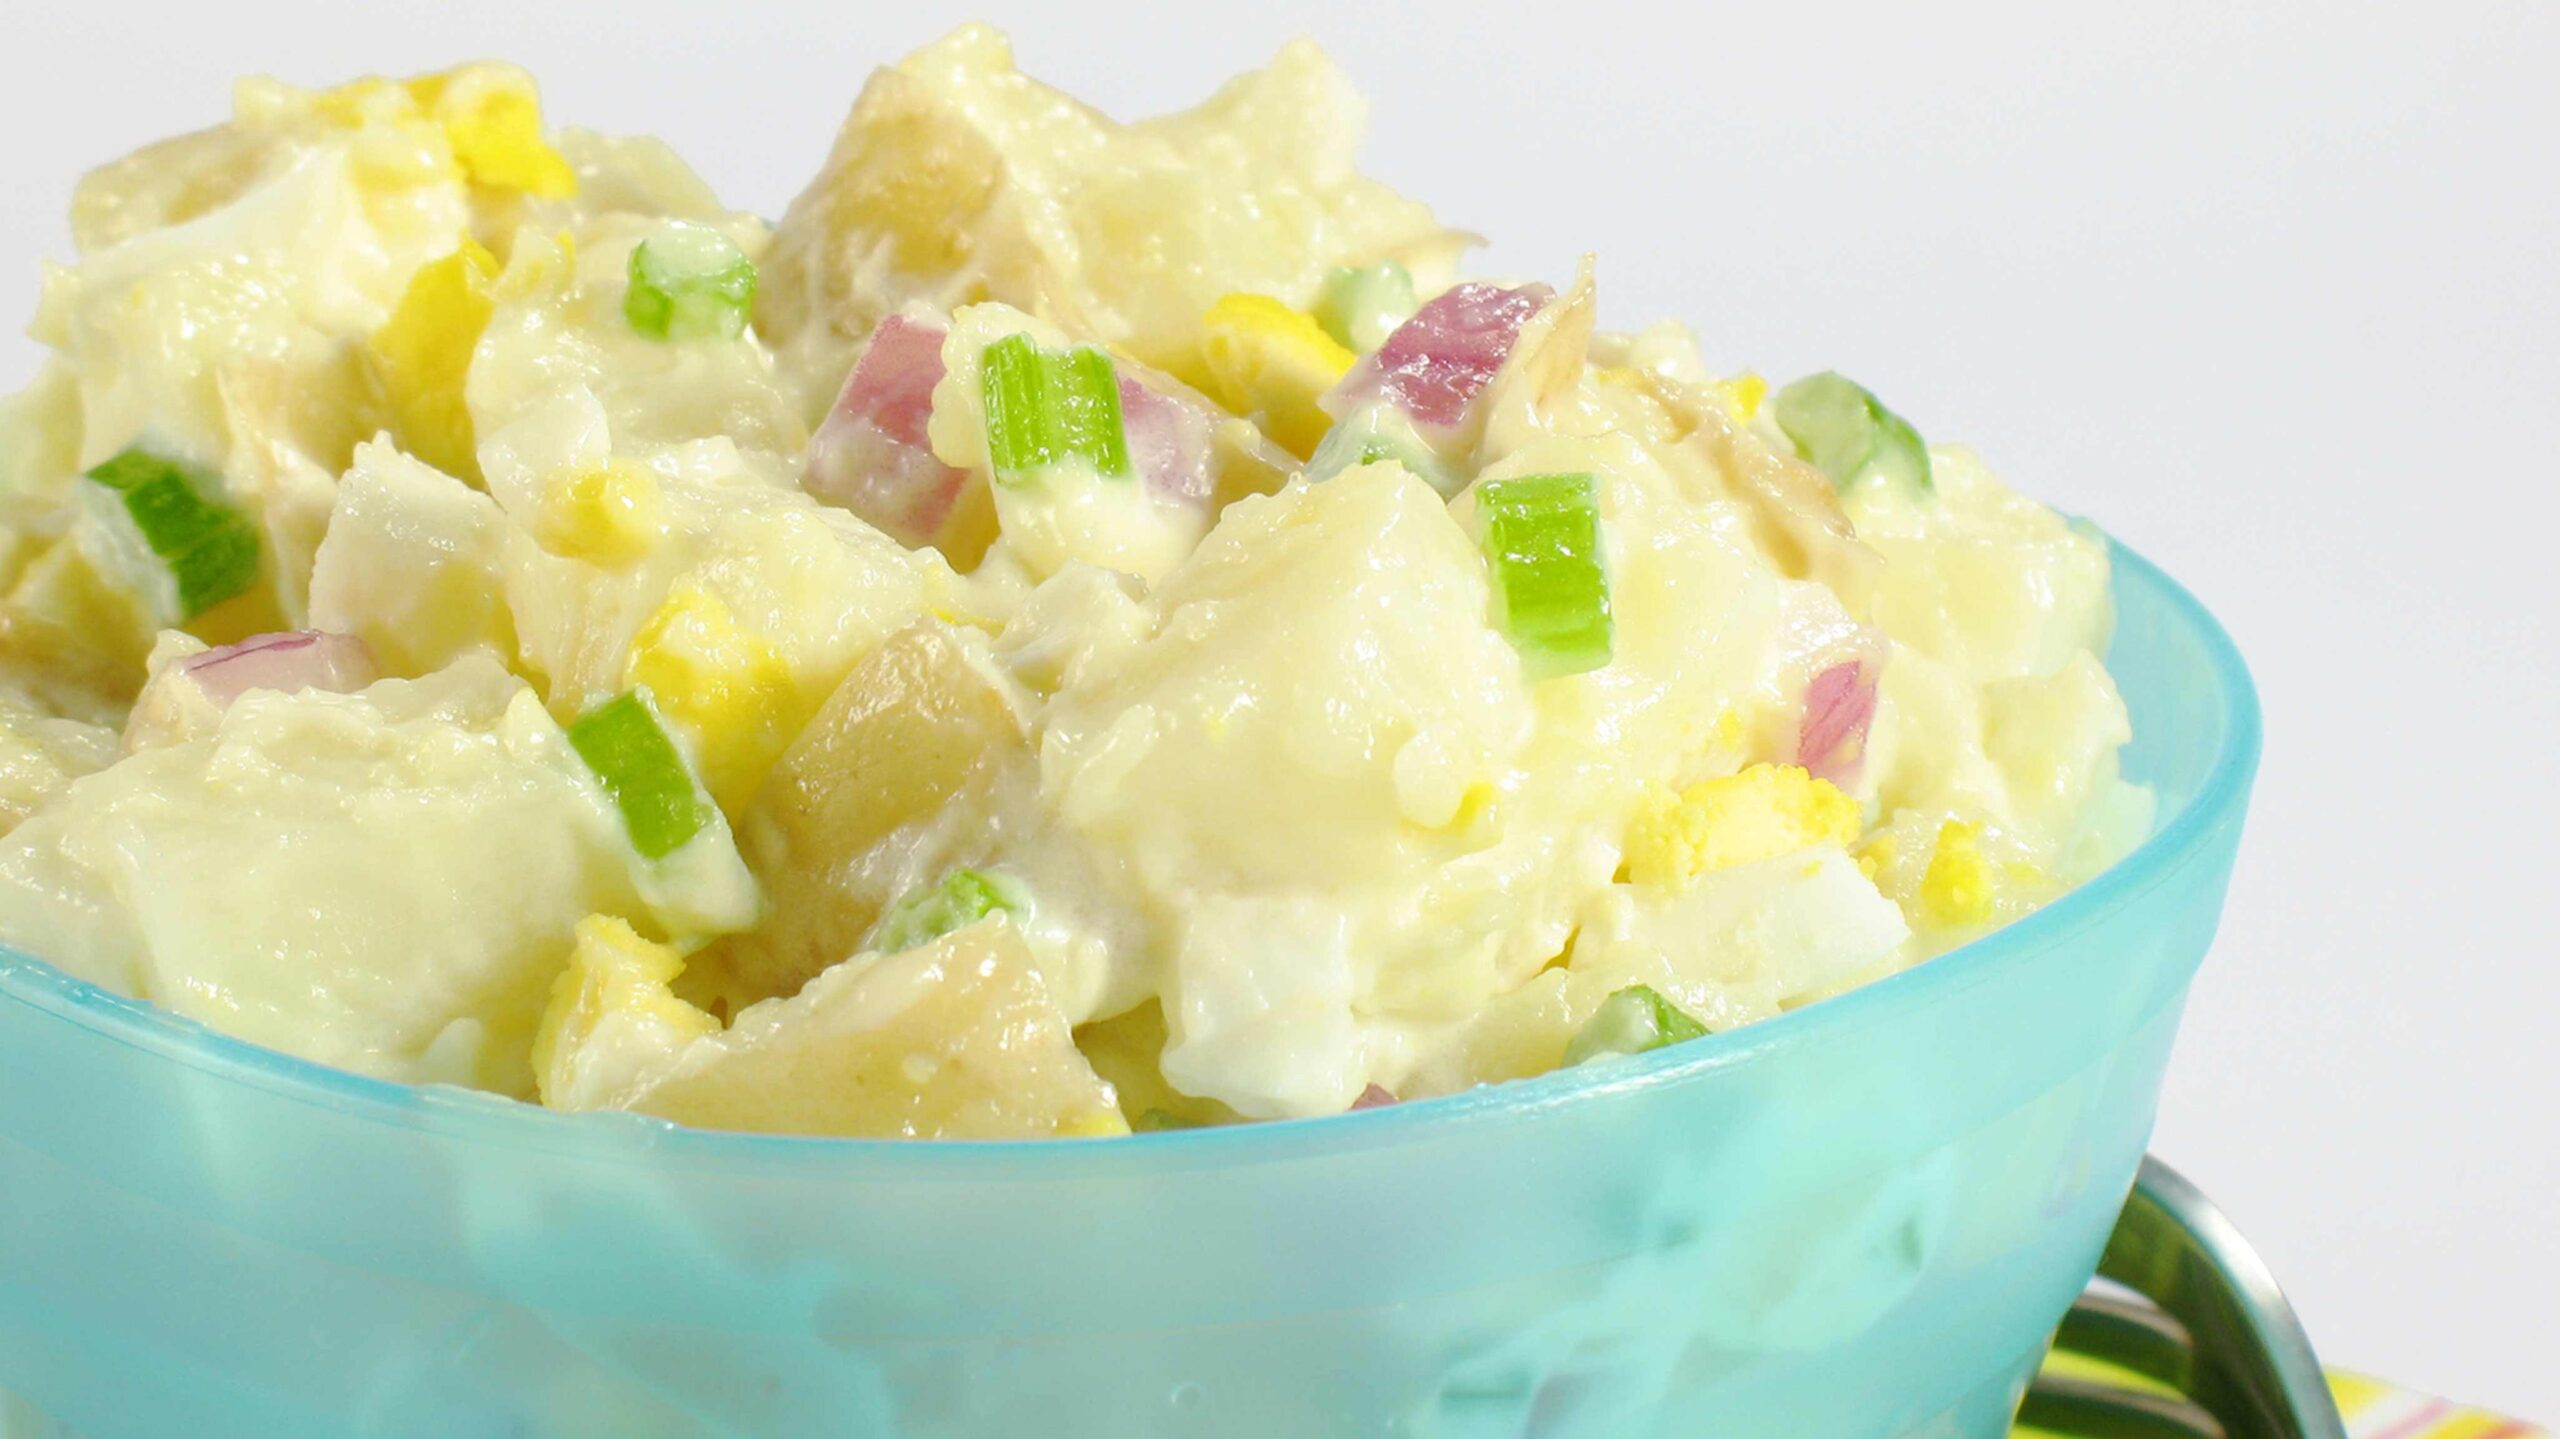  Watch out for this mouth-watering potato salad!